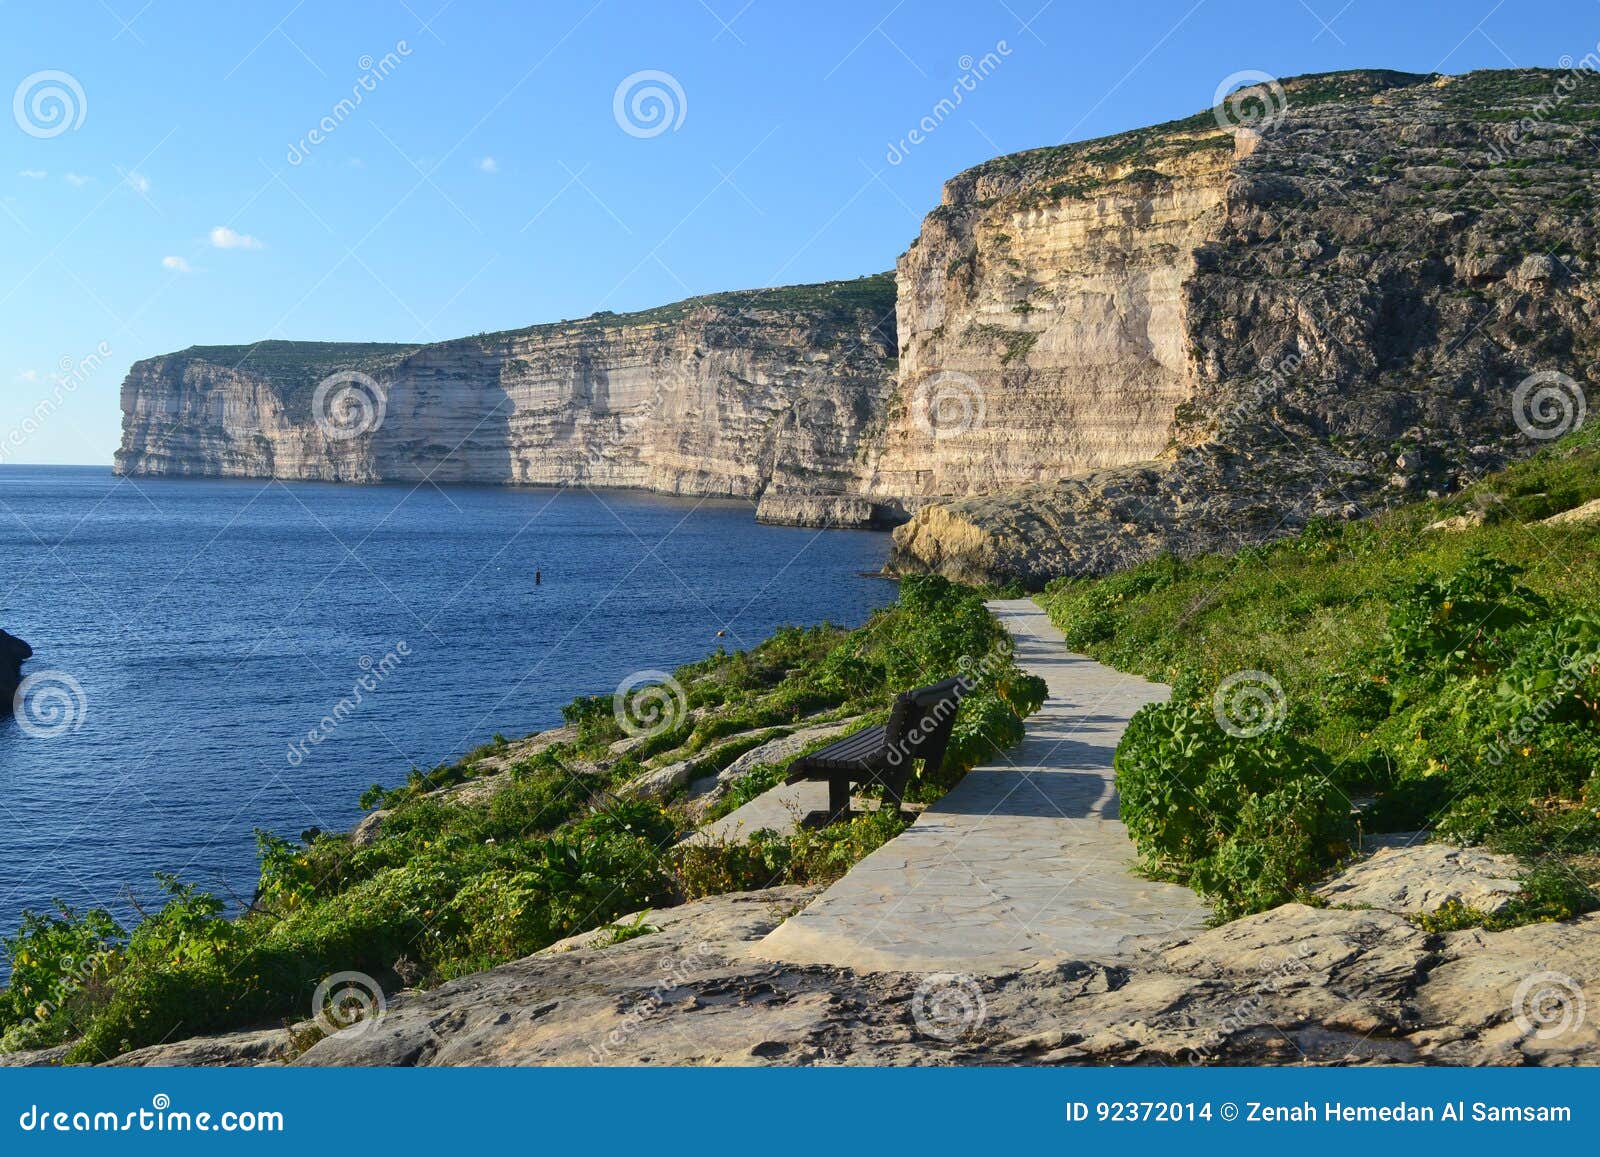 No Better Place To Relax- Gozo in Malta Stock Photo - Image of malta